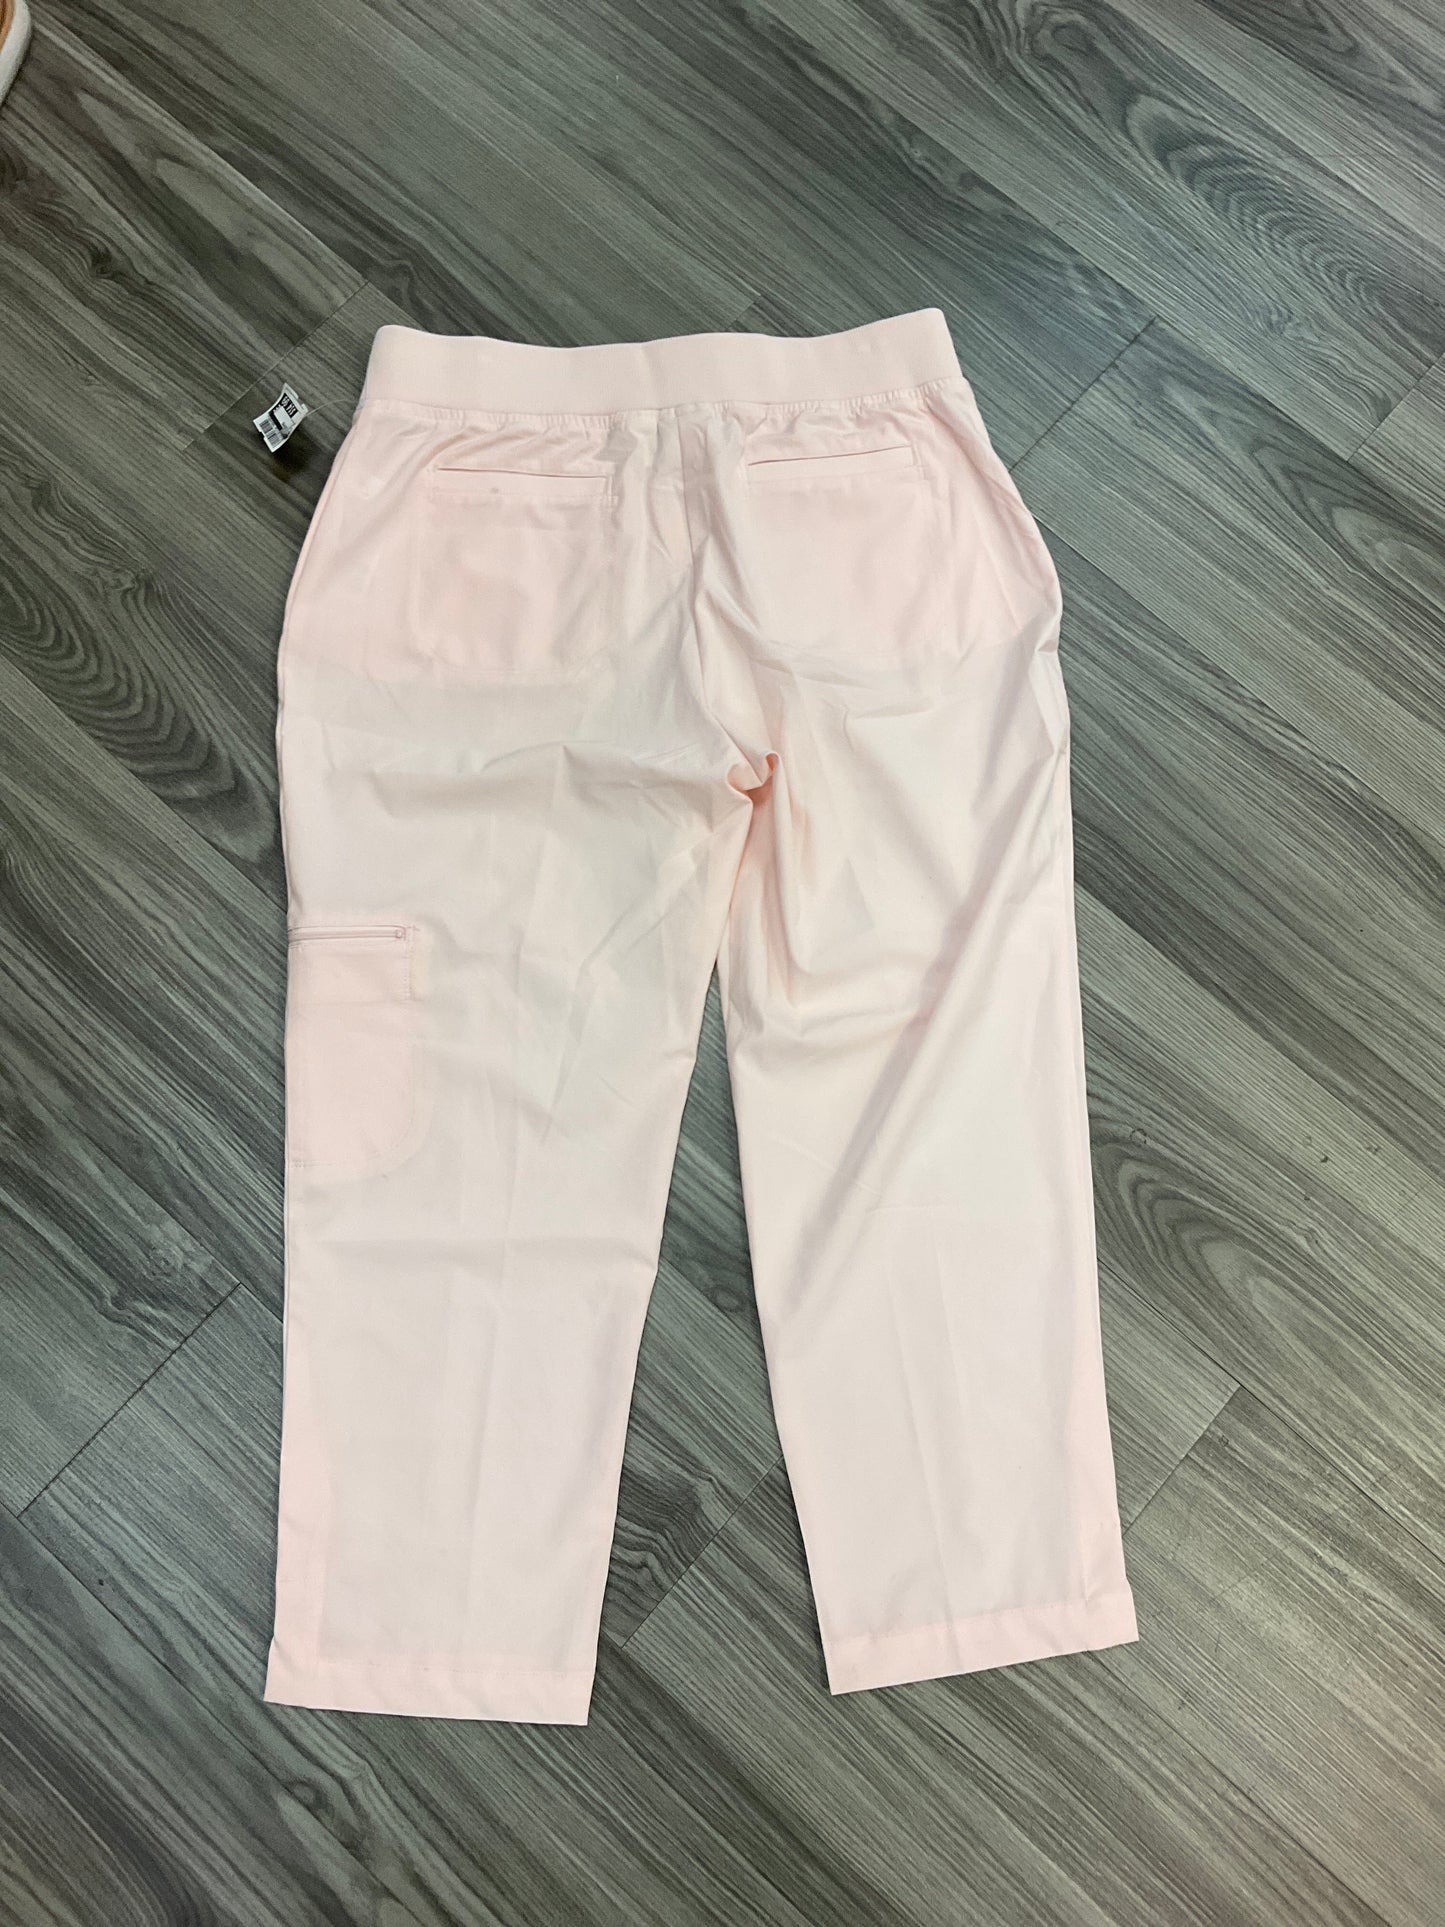 Pink Pants Cropped Chicos, Size 8